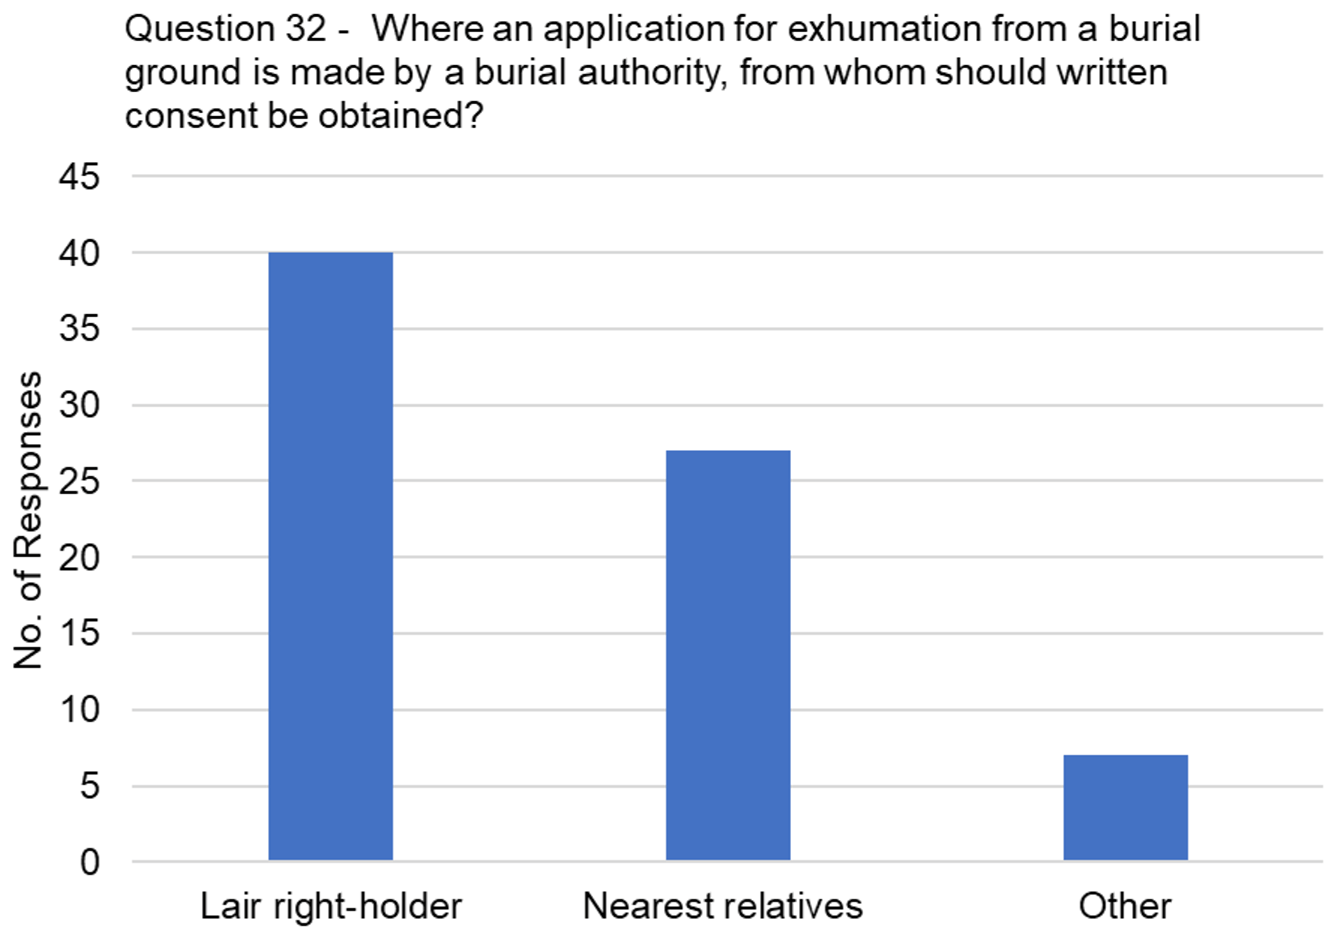 The graph visually presents the data from table 22, focussing on the responses to the question, "Where an application for exhumation from a burial ground is made by a burial authority, from whom should written consent be obtained?"